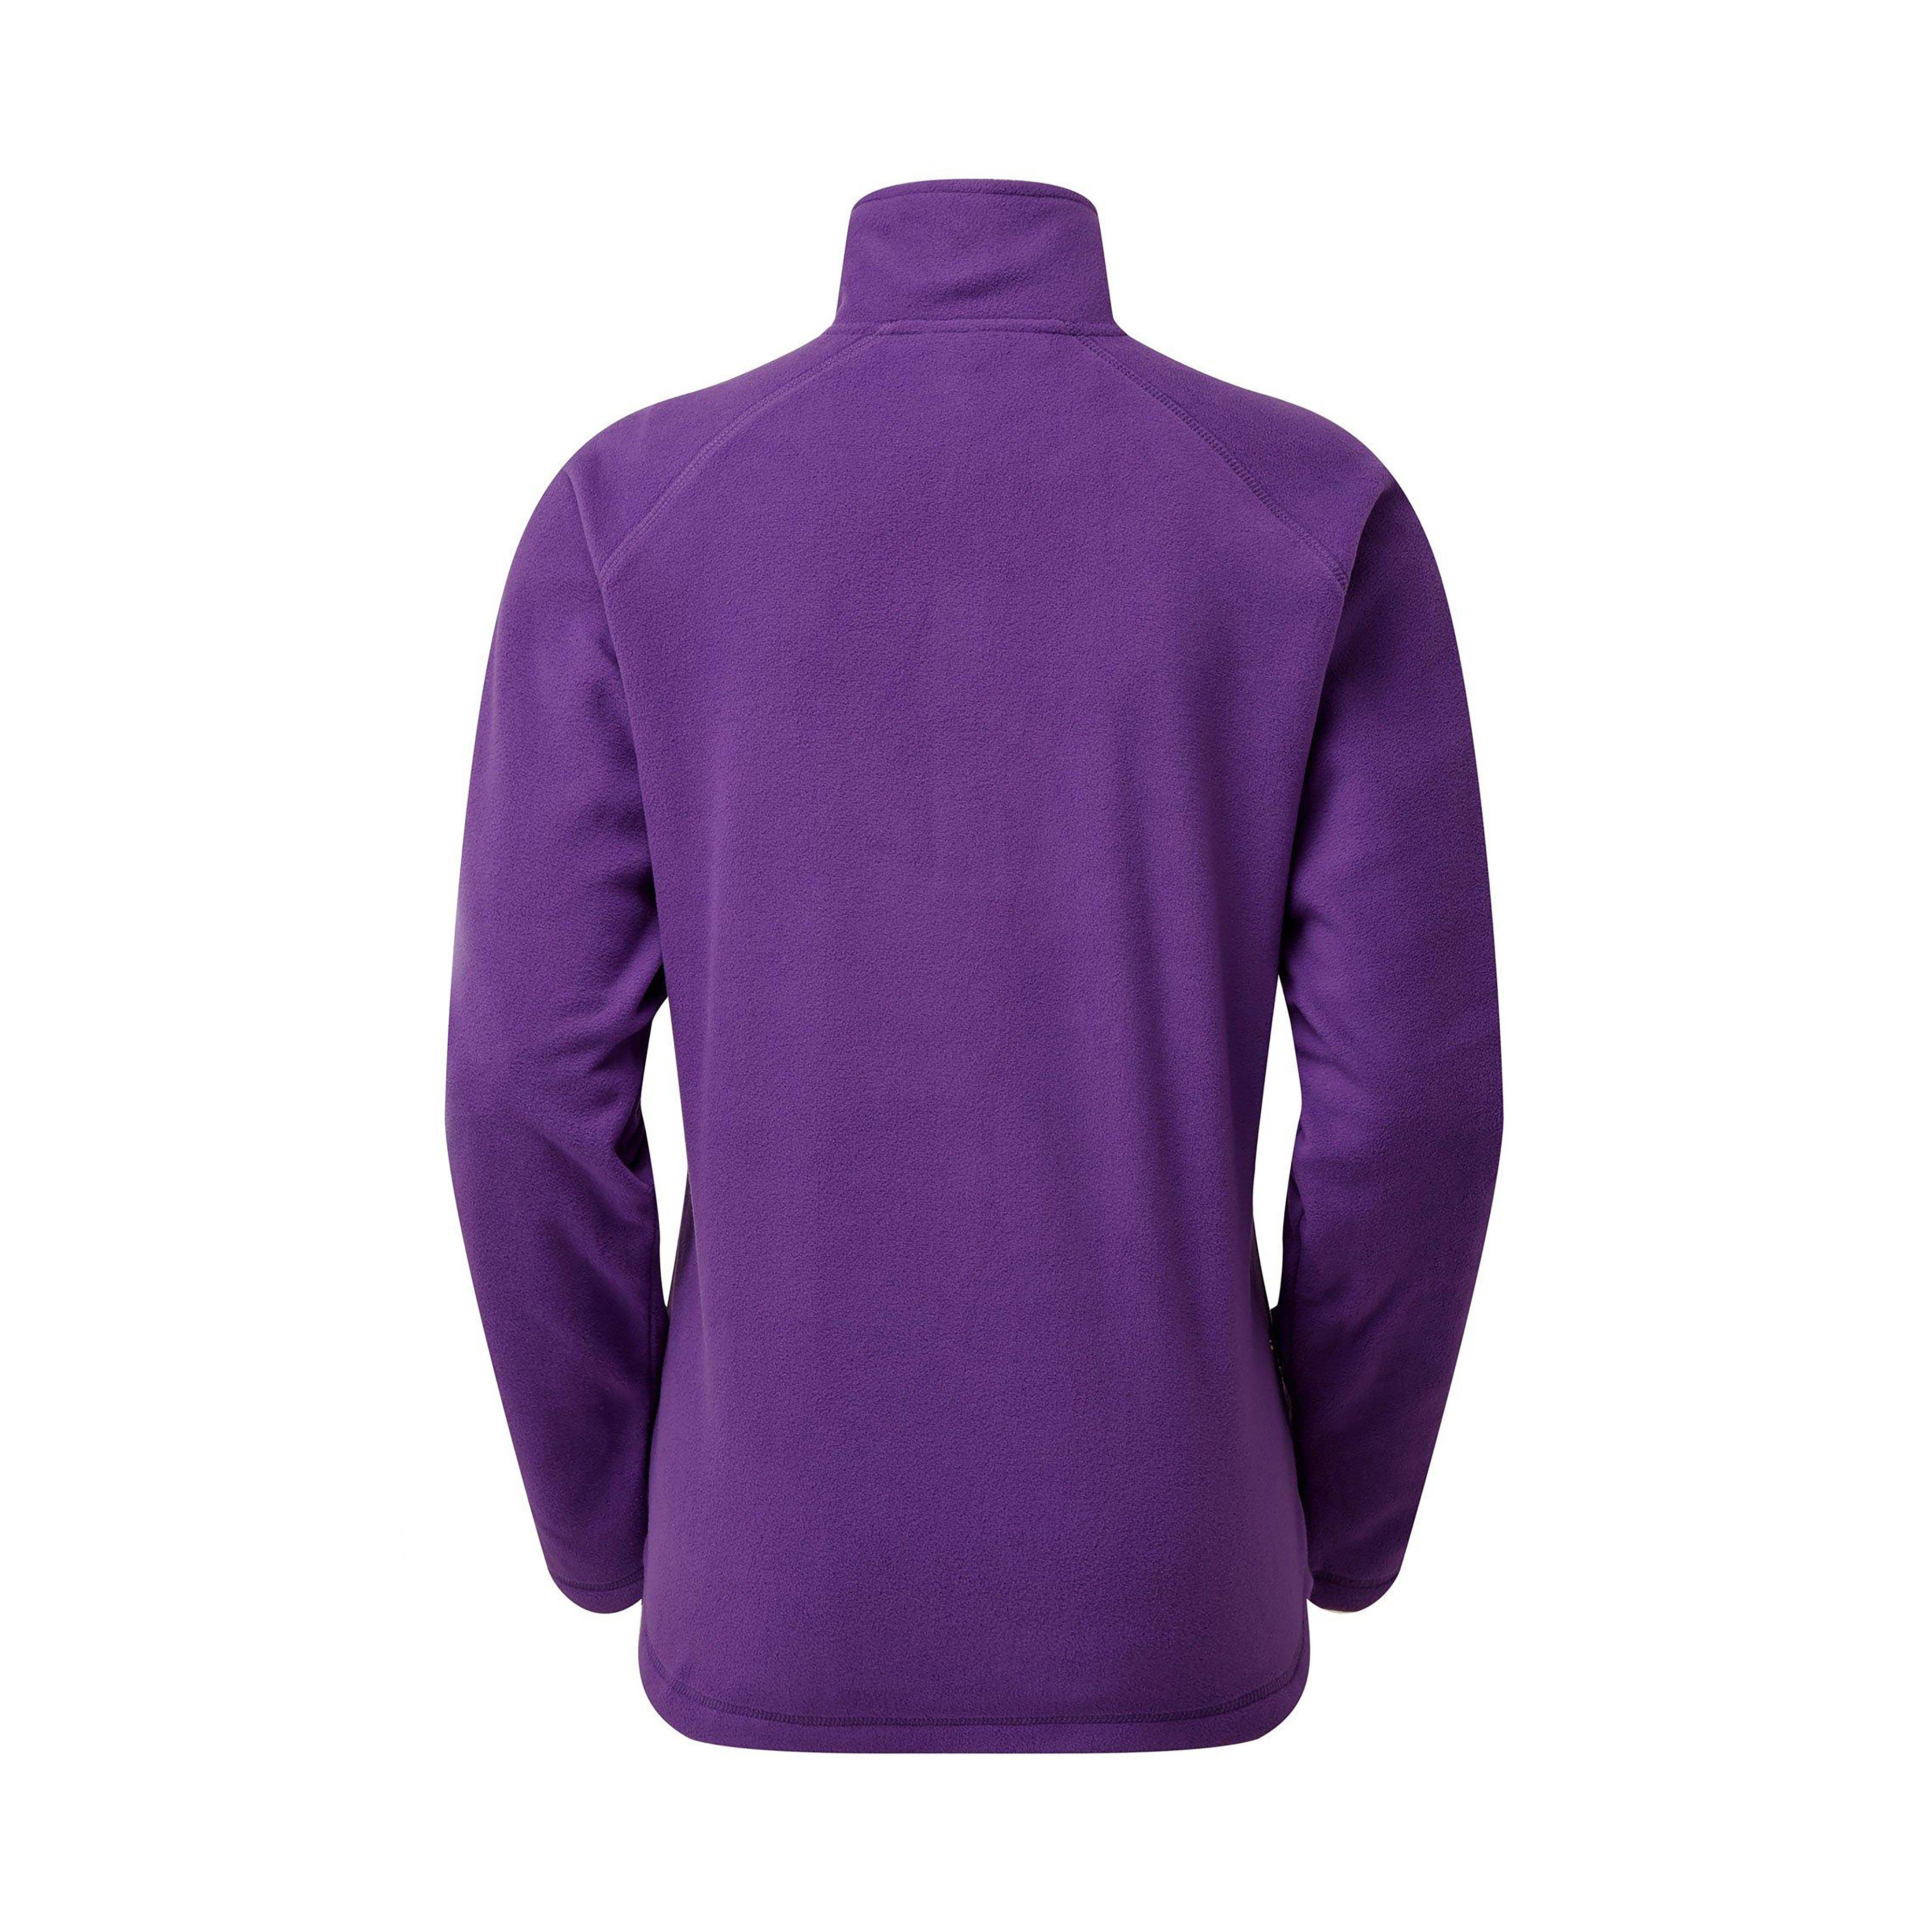 The Edge Women's Ascend Pull On Fleece Review